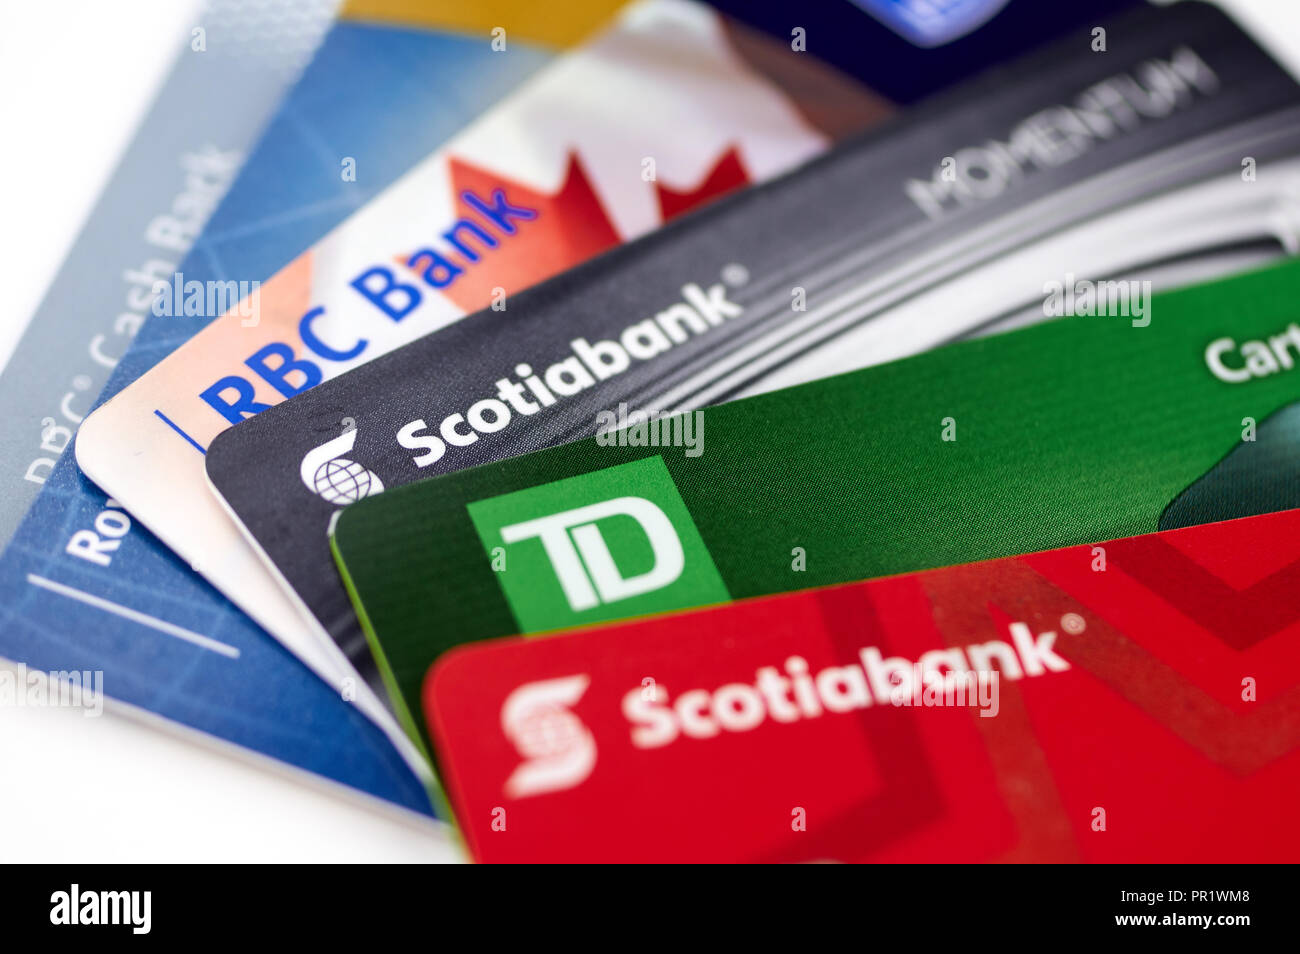 MONTREAL, CANADA - SEPTEMBER 21, 2018: Credit cards of different canadian banks. Scotiabank, RBC and TD Stock Photo